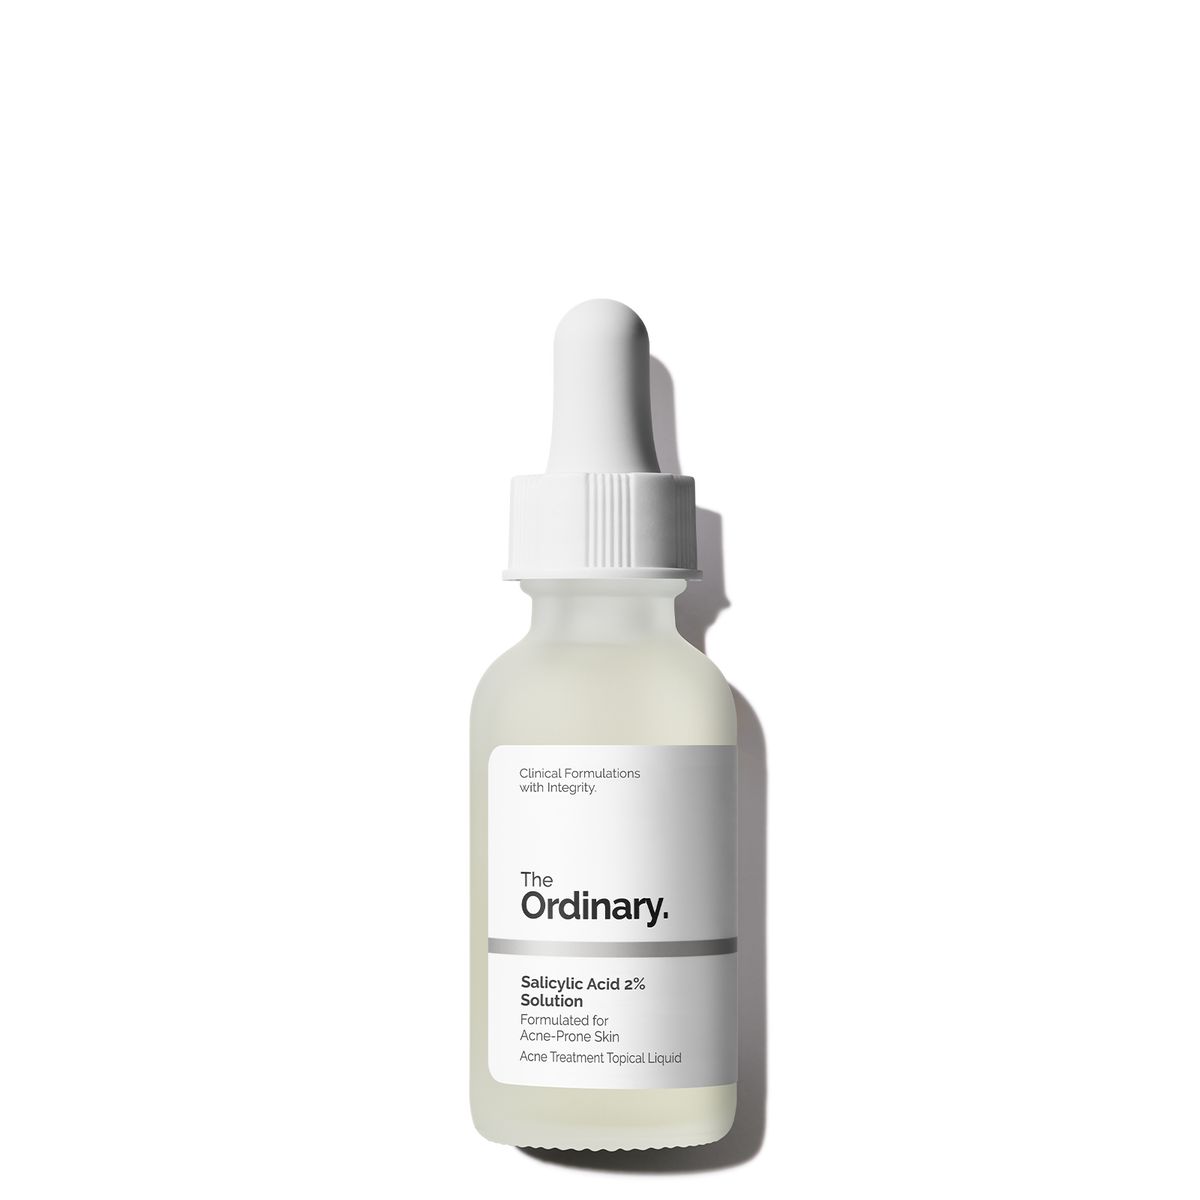 The Ordinary Salicylic Acid 2% Solution 30ml for acne and exfoliation, clears pores, refines skin texture, and promotes a balanced, clearer complexion